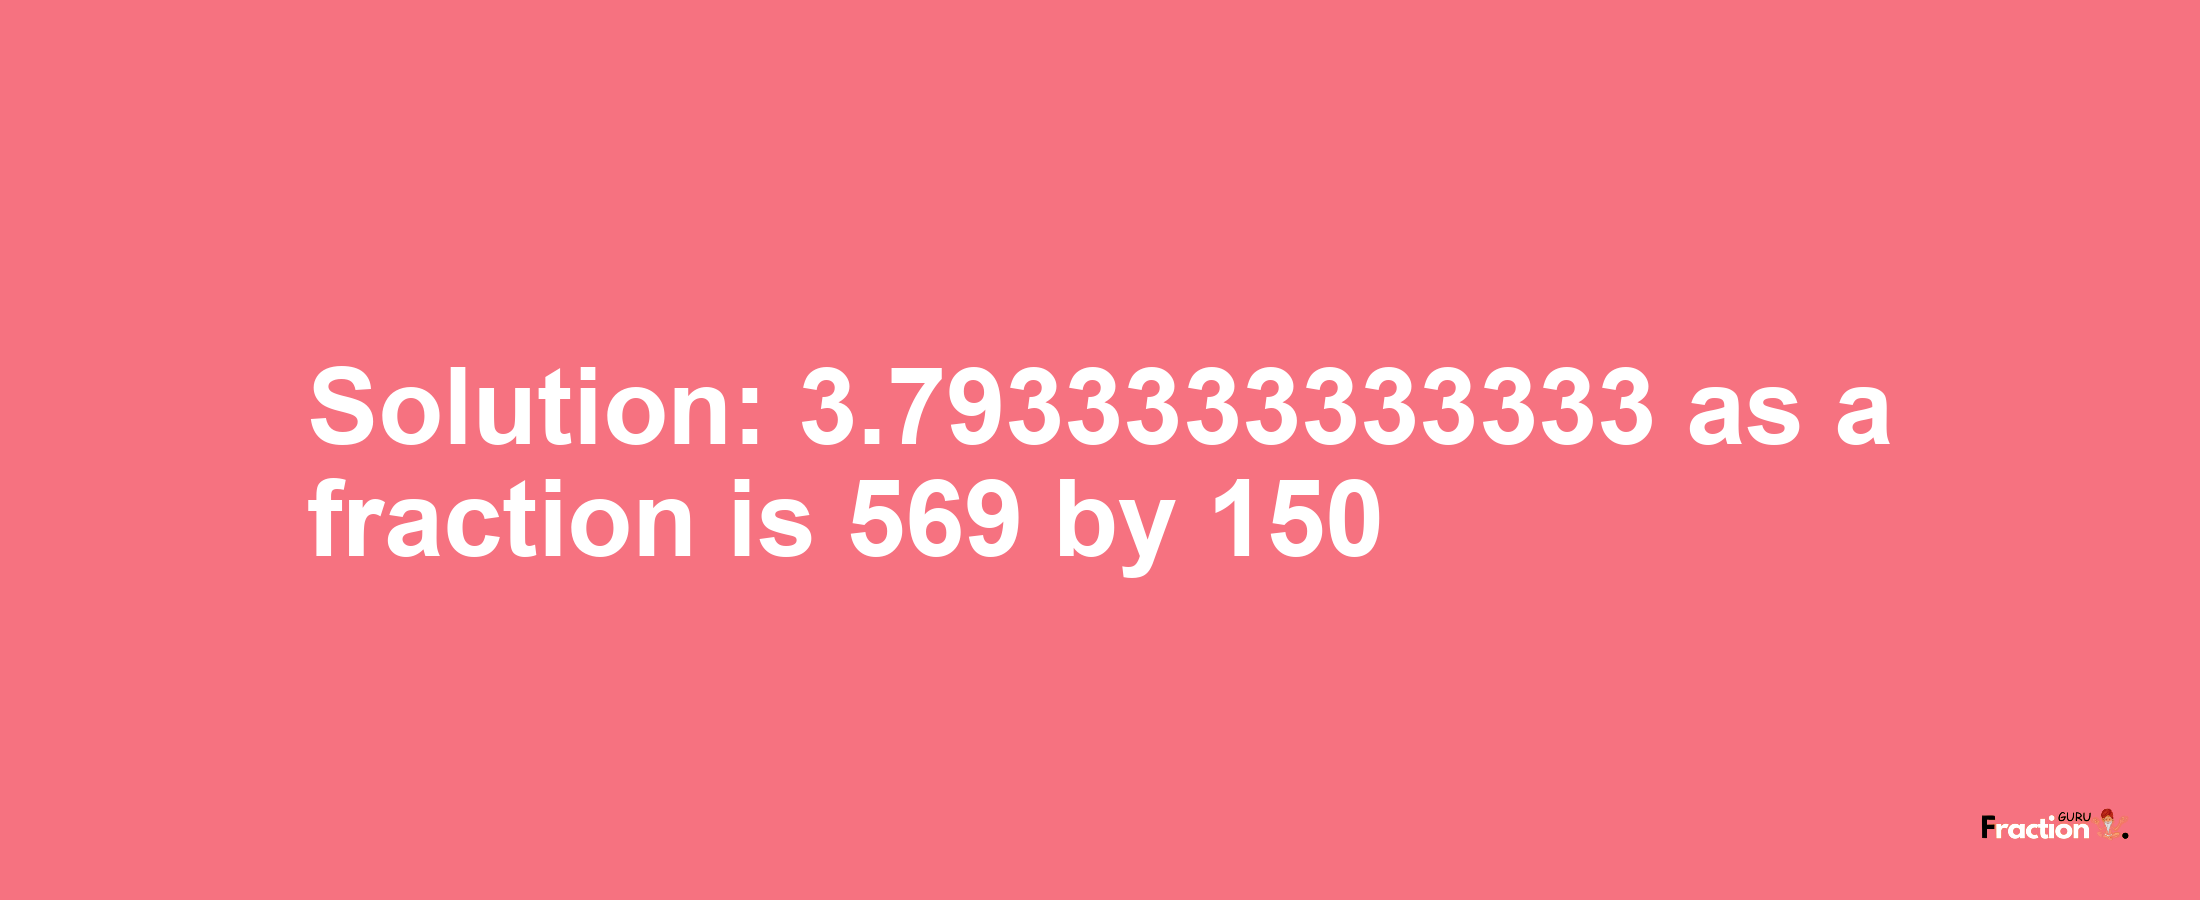 Solution:3.7933333333333 as a fraction is 569/150